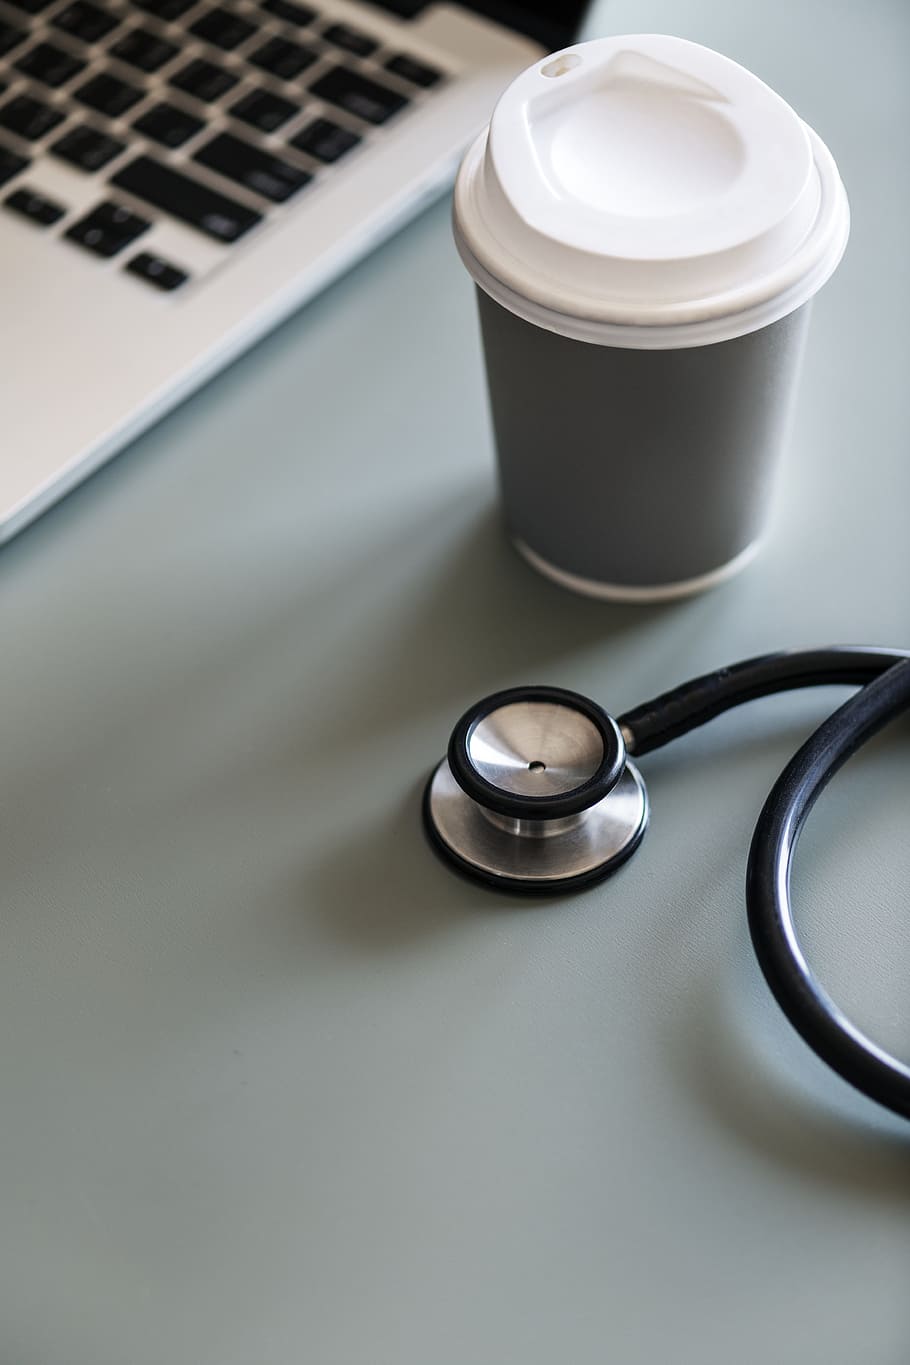 stethoscope, coffee cup, technology, cardiac, care, checkup, clinical, coffee, computer, cup